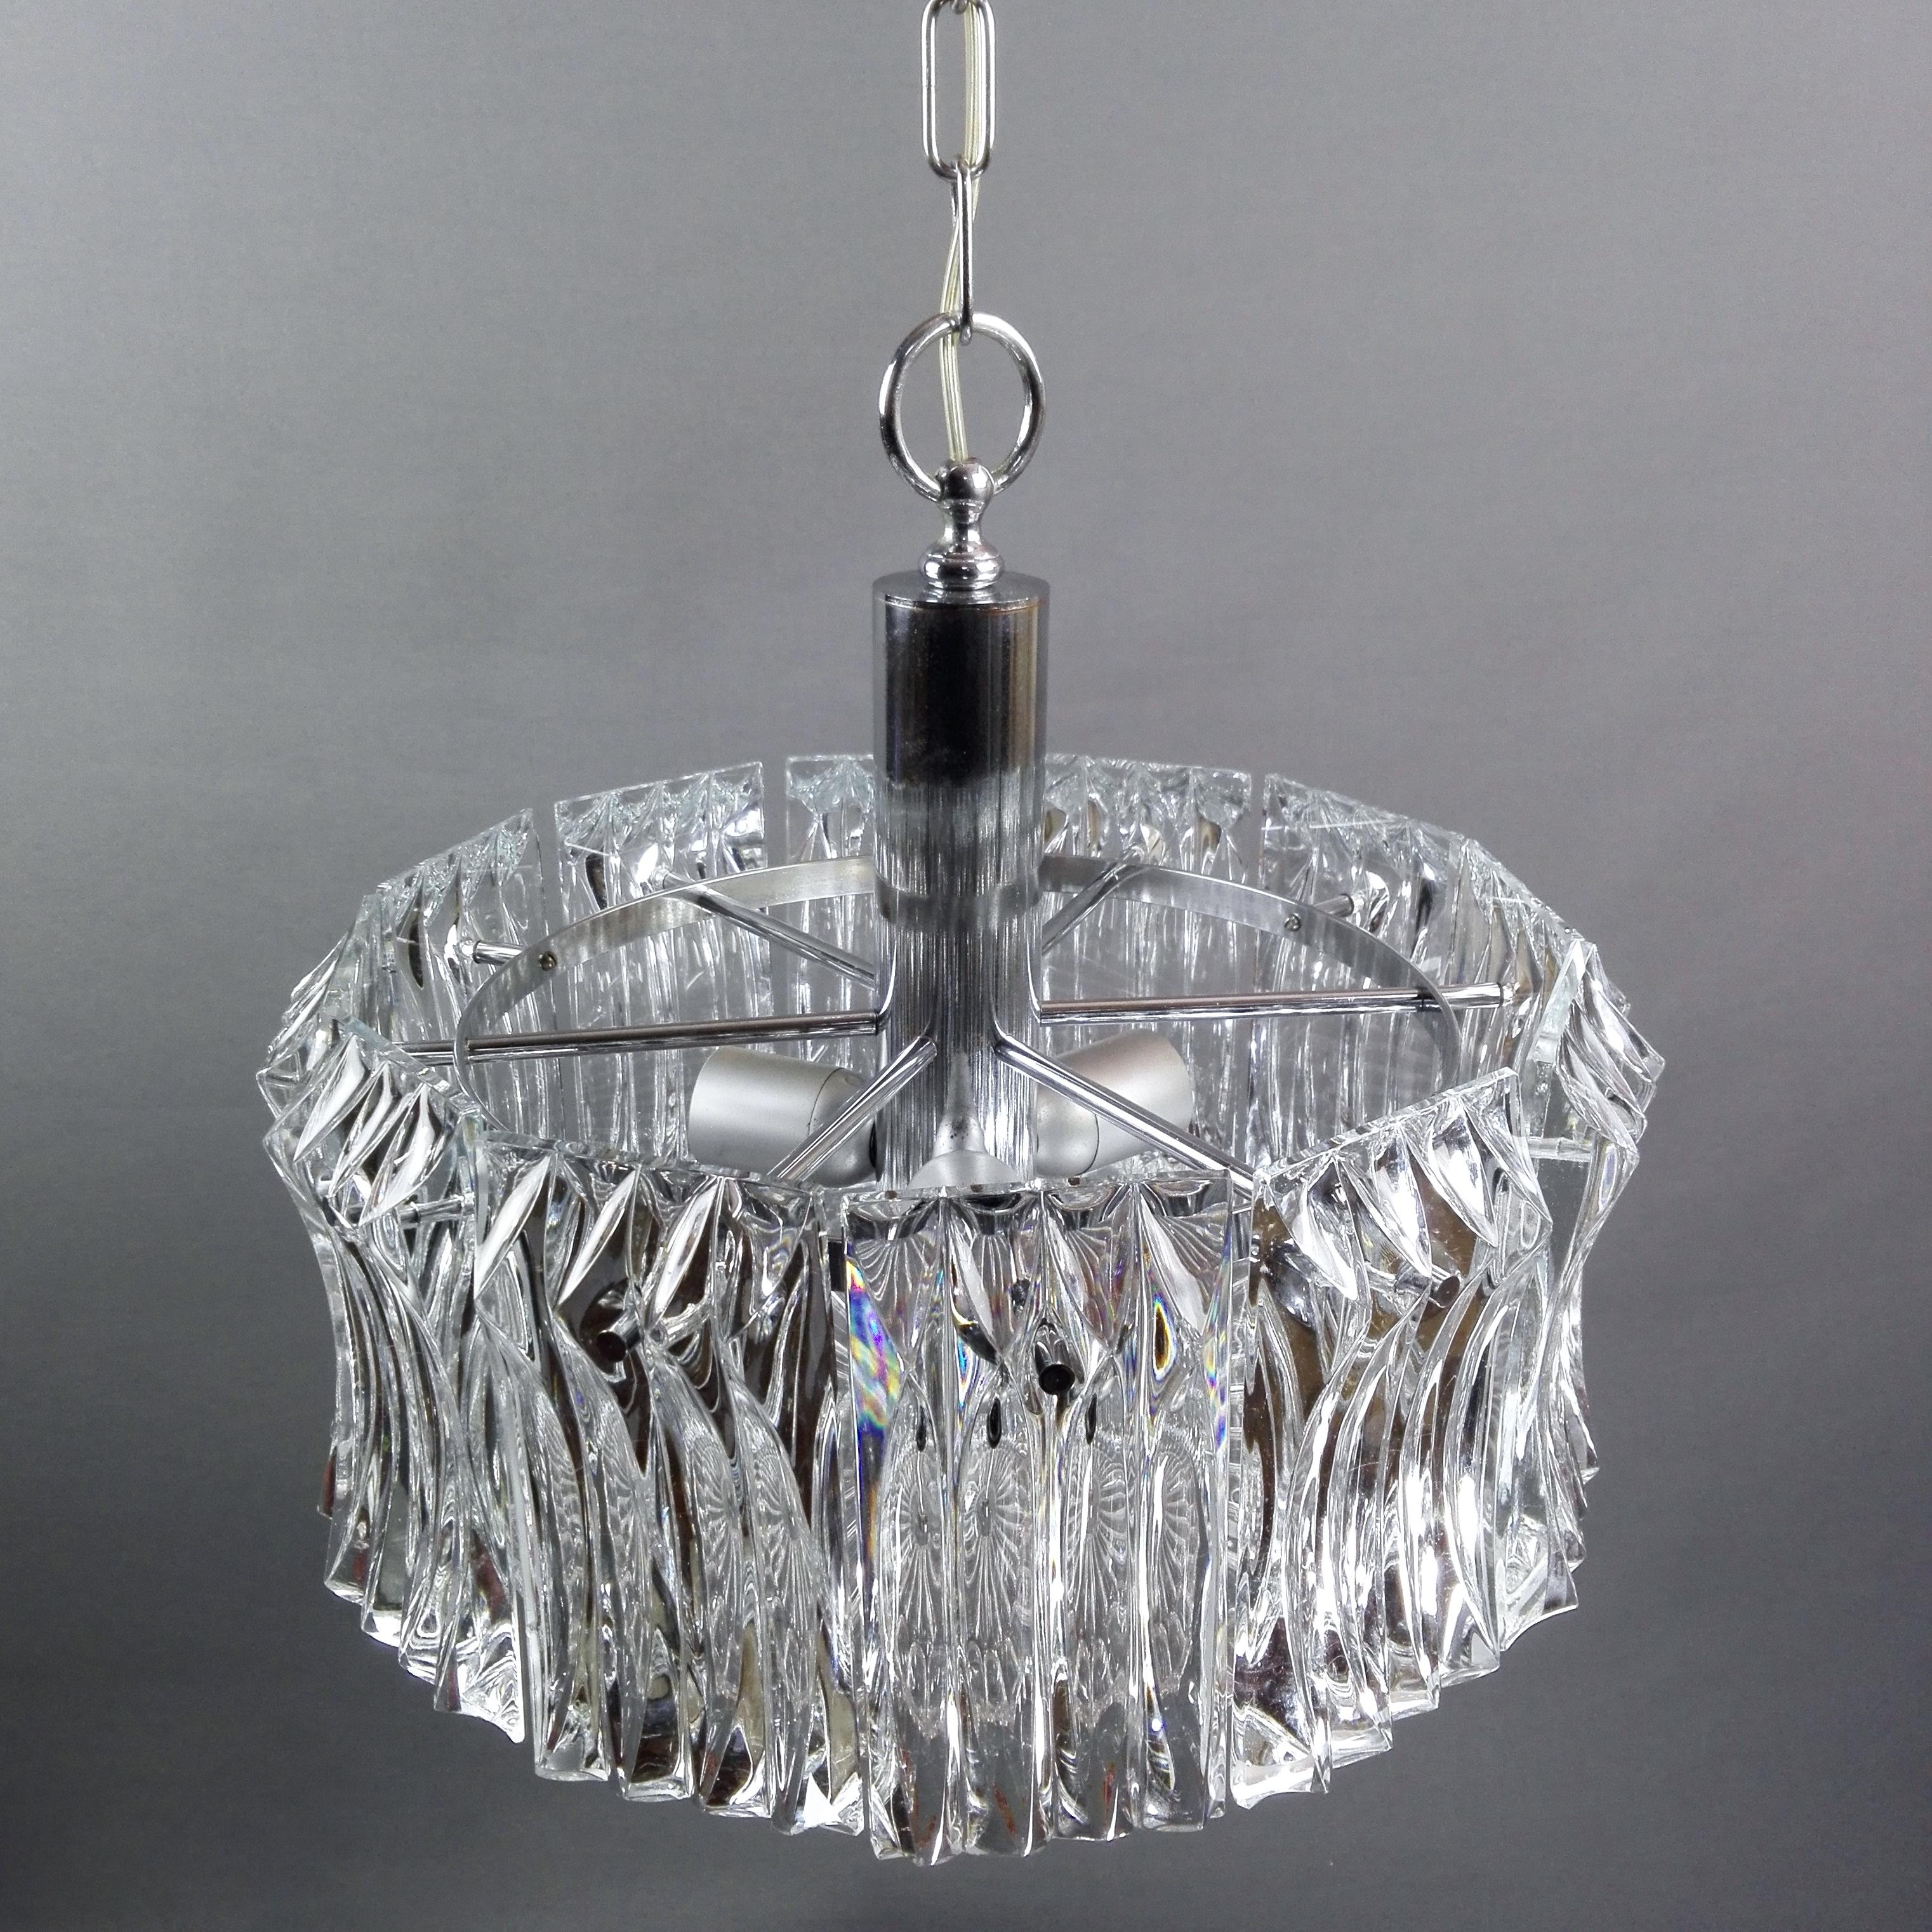 Beveled 1960s Paolo Venini attributable Murano Glass and Chrome Three-Light Chandelier For Sale